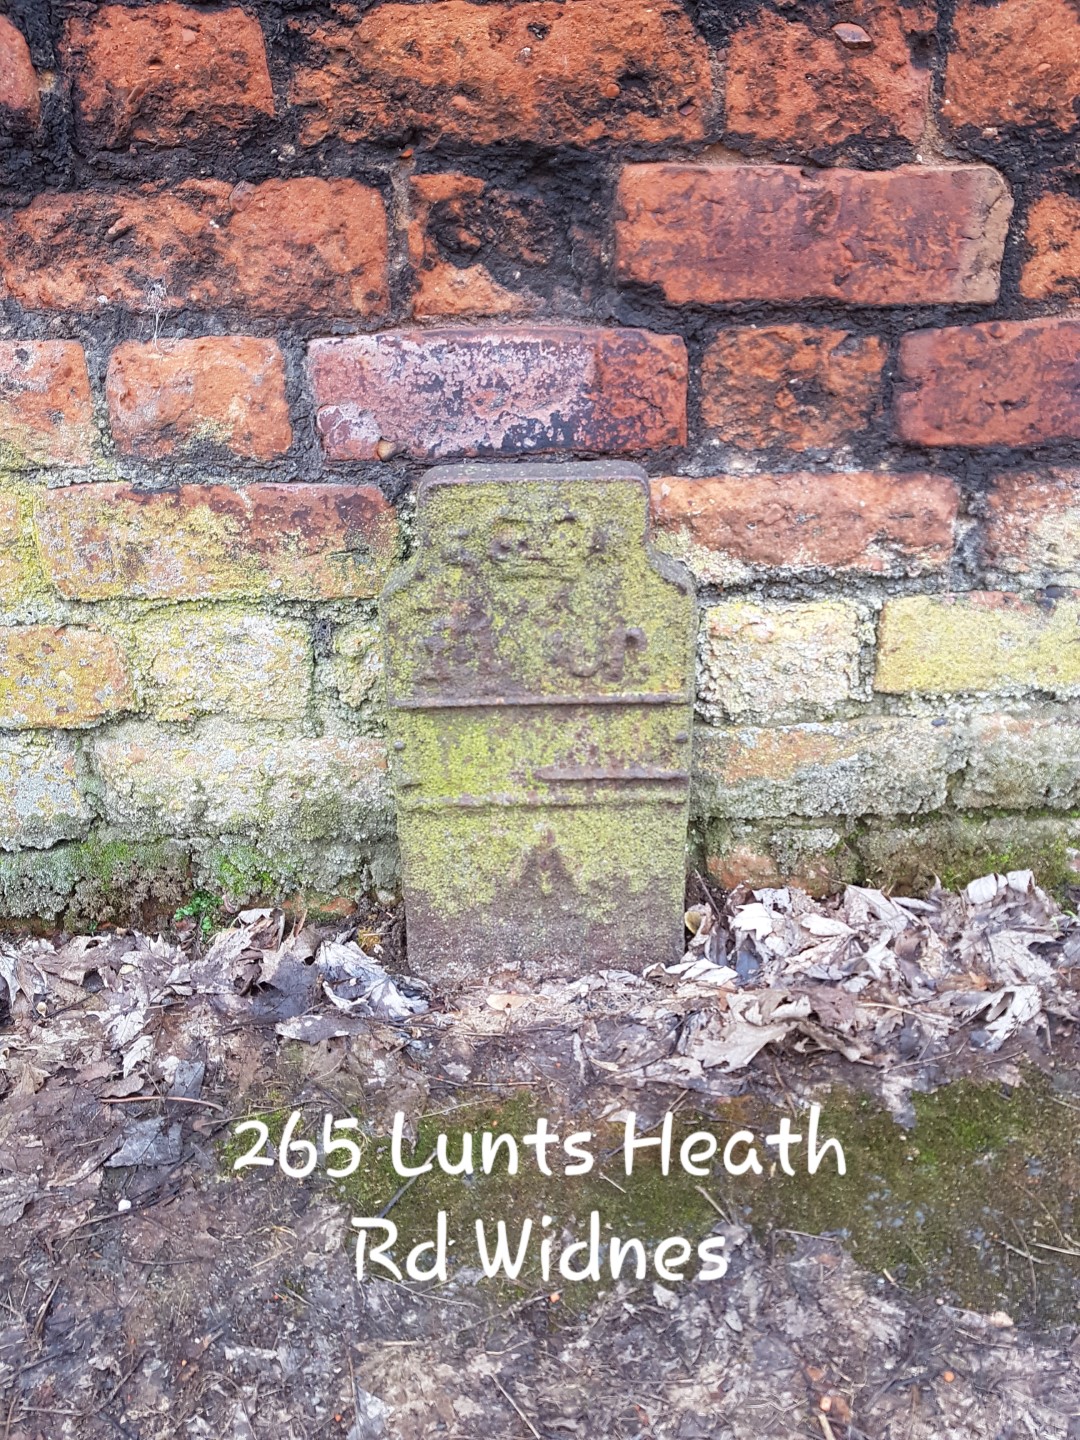 Telegraph cable marker post at 265 Lunts Heath Road, Widnes by Jan Gibbons 